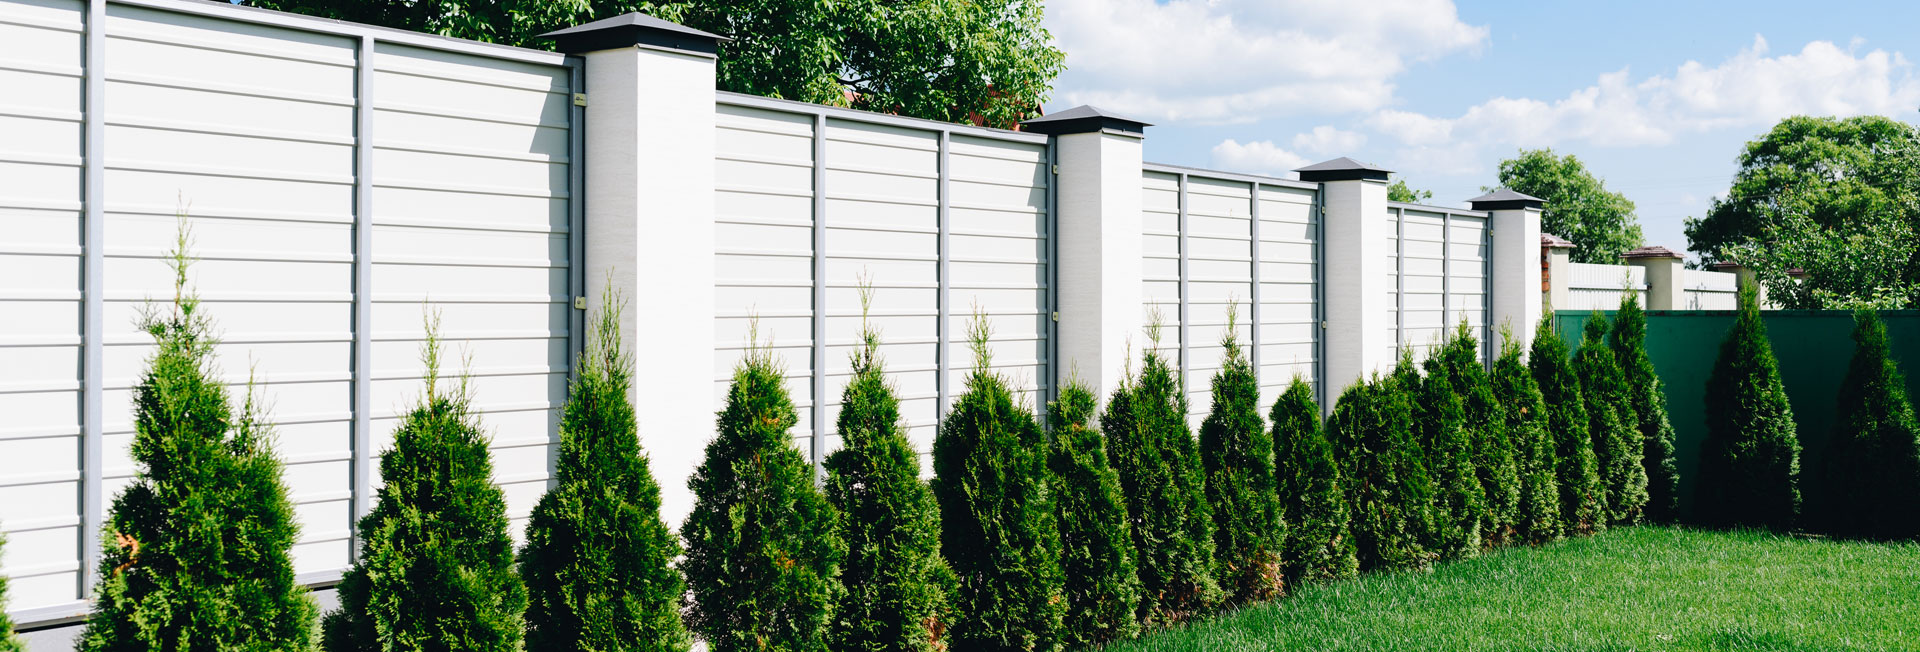 Fence Financing For Options for You: New Fence Installation